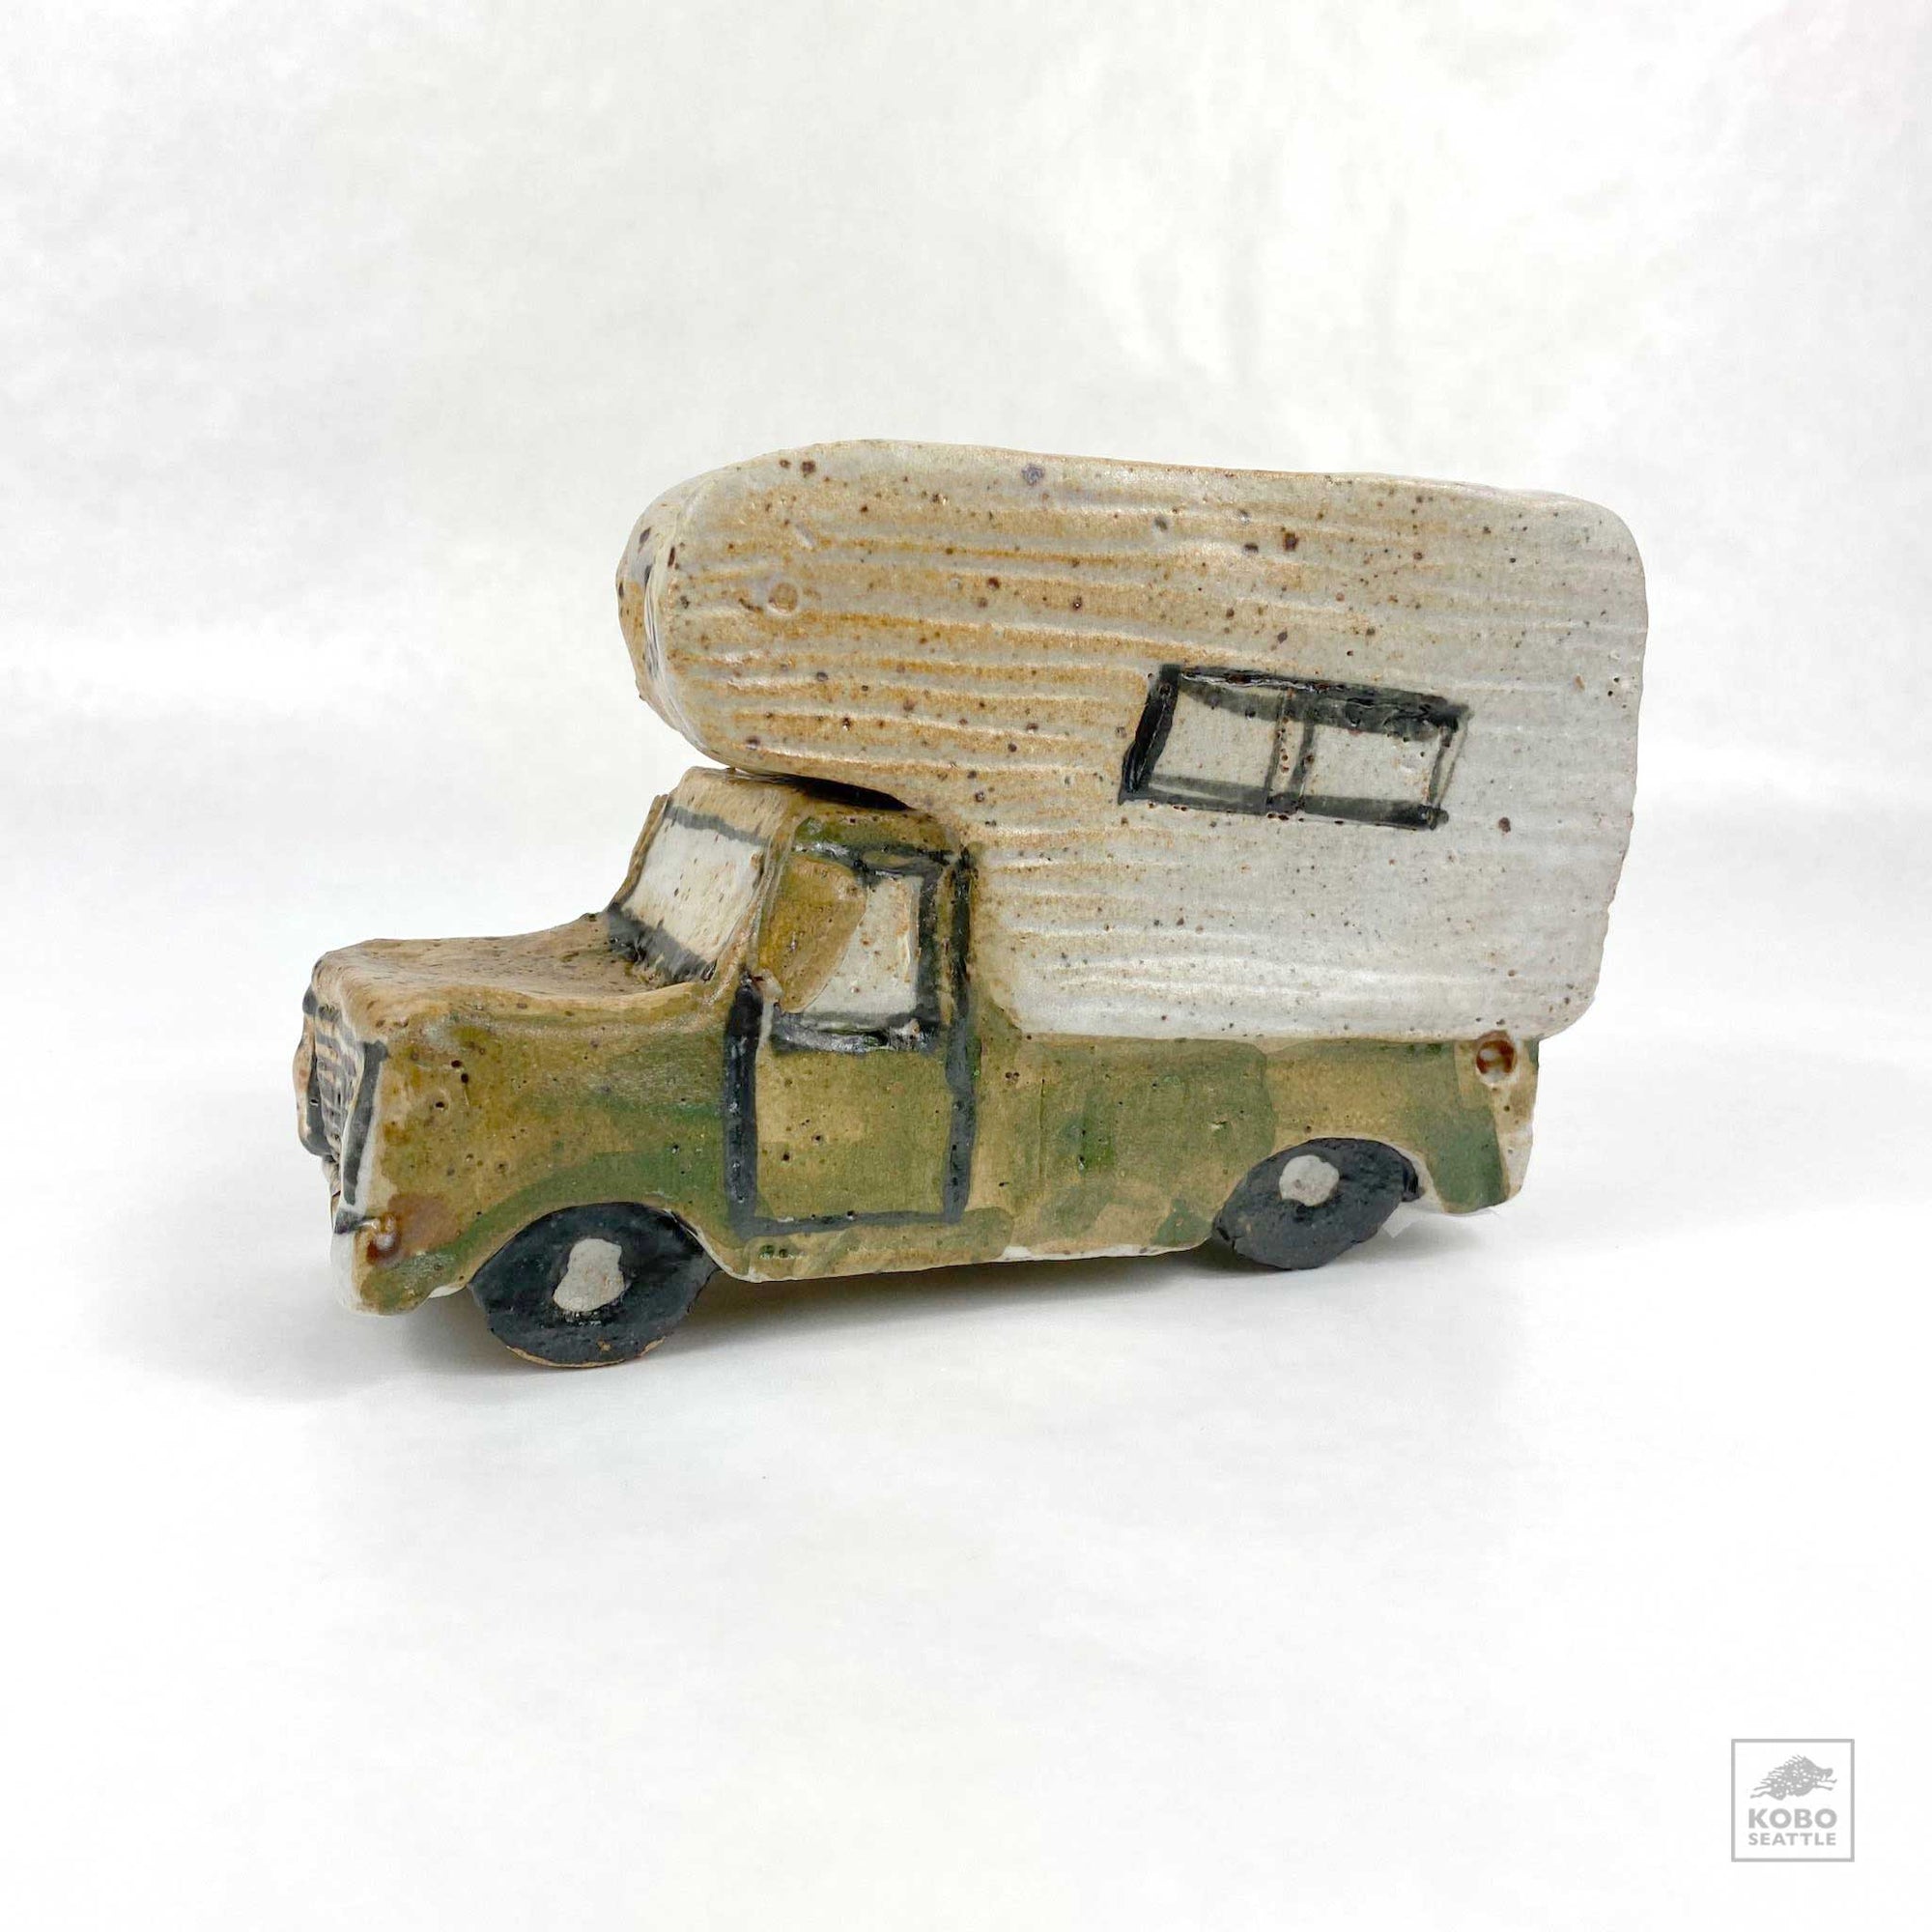 Truck & Camper by Aaron Murray